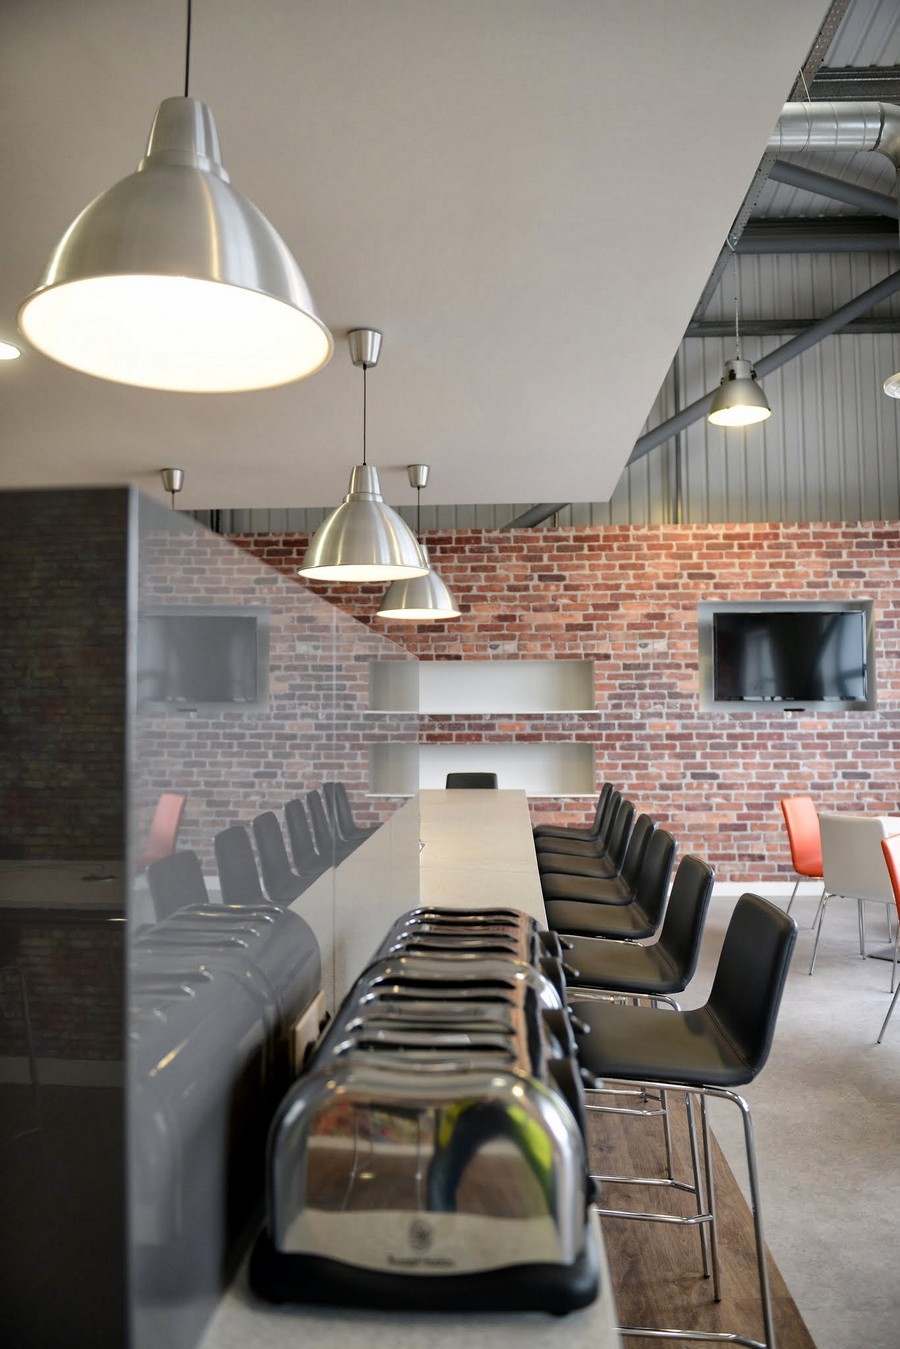 Room Space Nsg Fascinating Room Space Design Of NSG Modern Offices With Several Black Colored Stools Which Has Silver Stainless Feet Bedroom Elegant And Modern Dining Room Sets With Wonderful Brick Walls